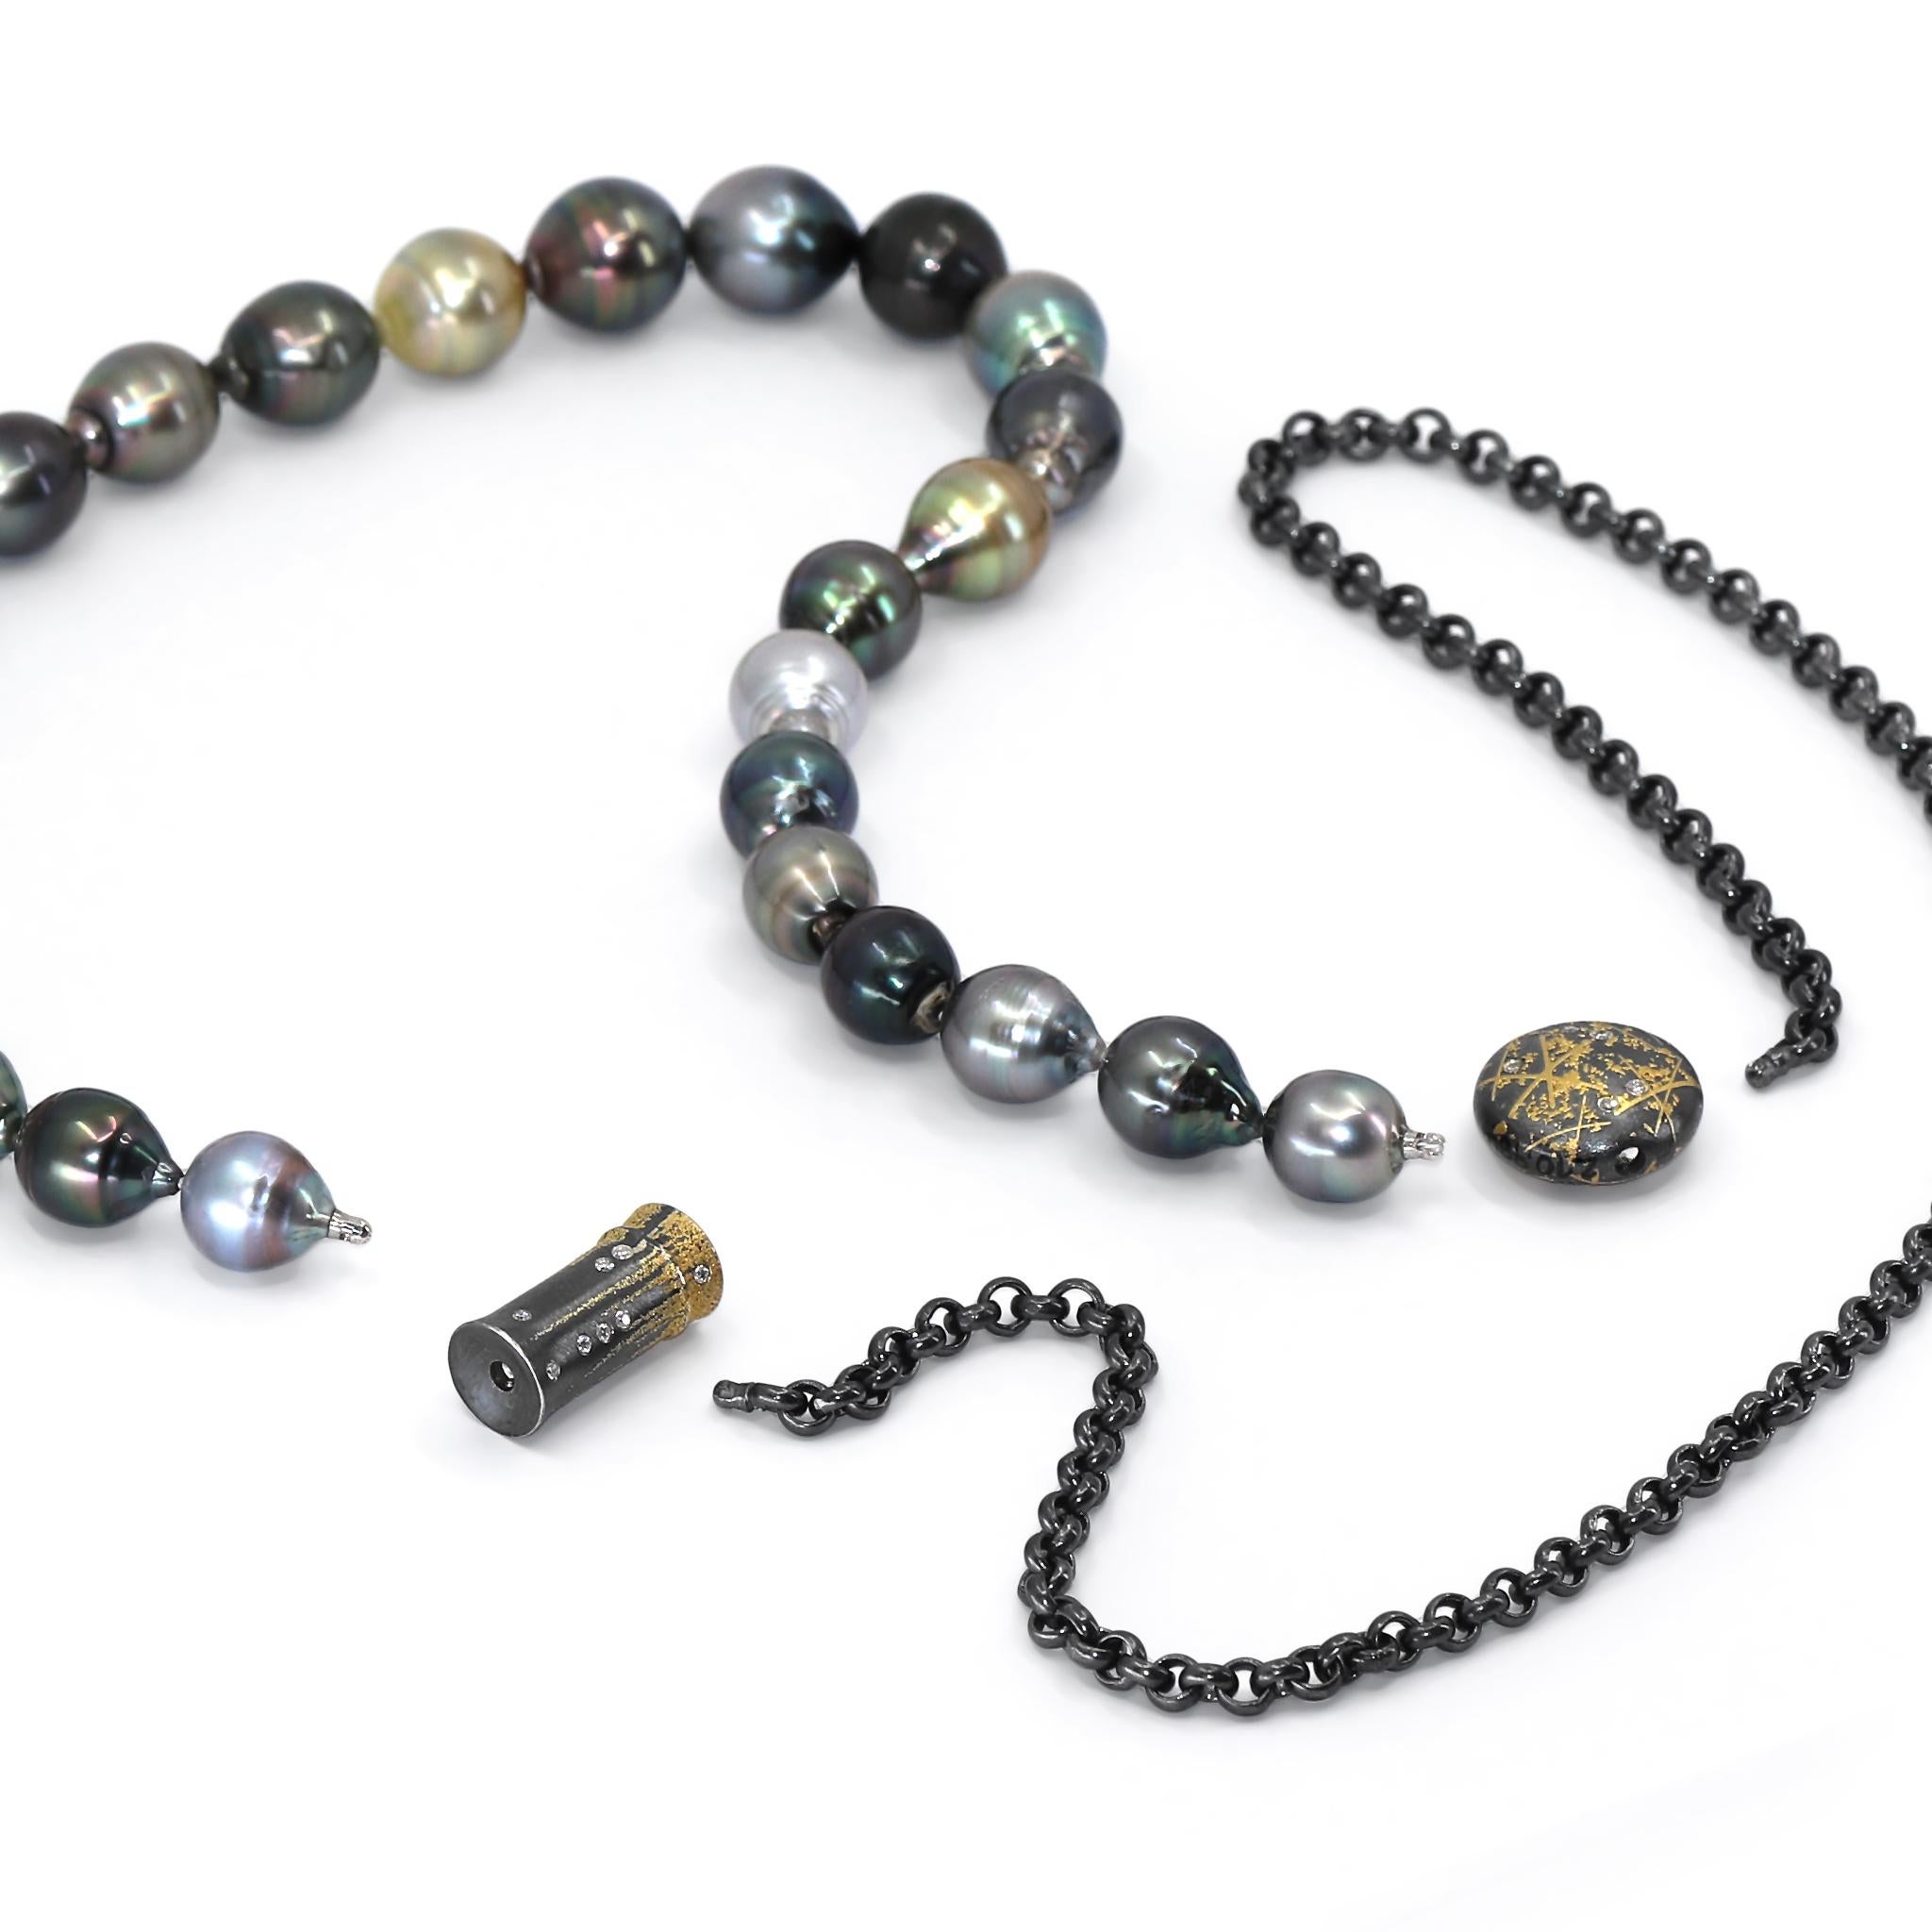 One of a Kind Necklace handcrafted in Germany by renowned, award-winning jewellery maker Peter Schmid of Atelier Zobel, featuring a stunning 16 inch strand of multicolored Tahitian and South Sea baroque pearls connected to an 18 inch black